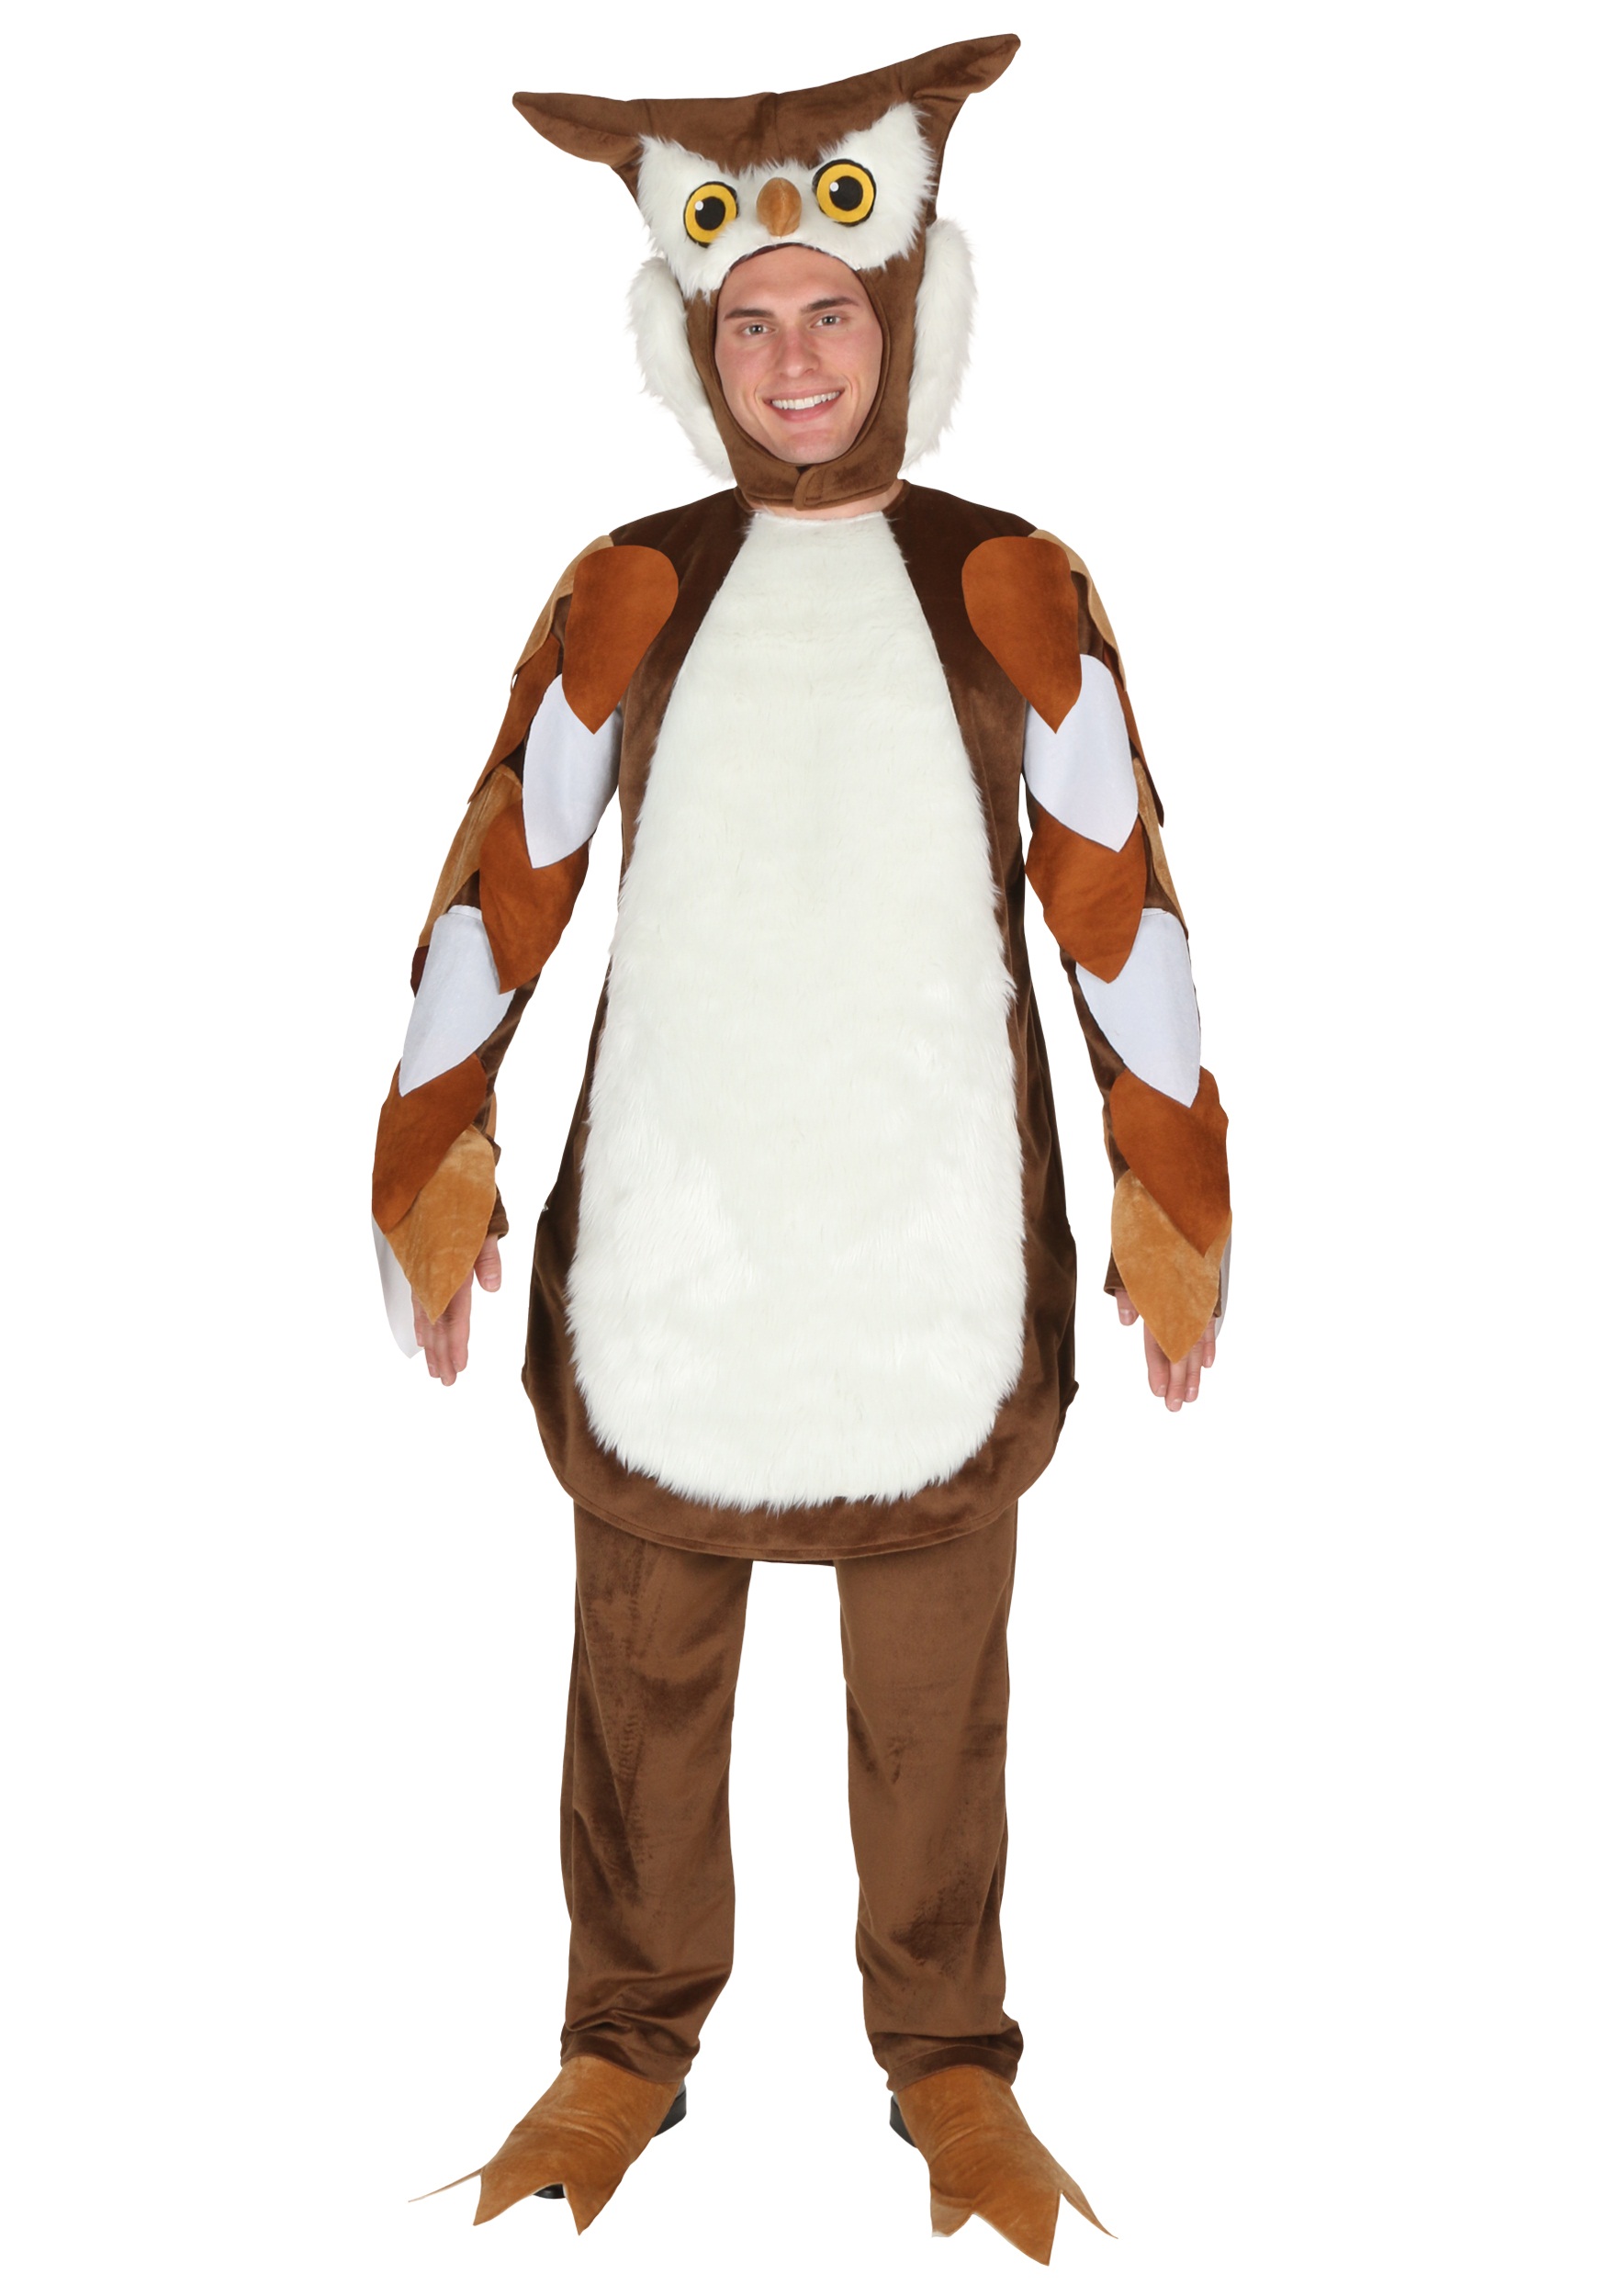 https://images.fun.com/products/26415/1-1/owl-costume-for-adult-.jpg